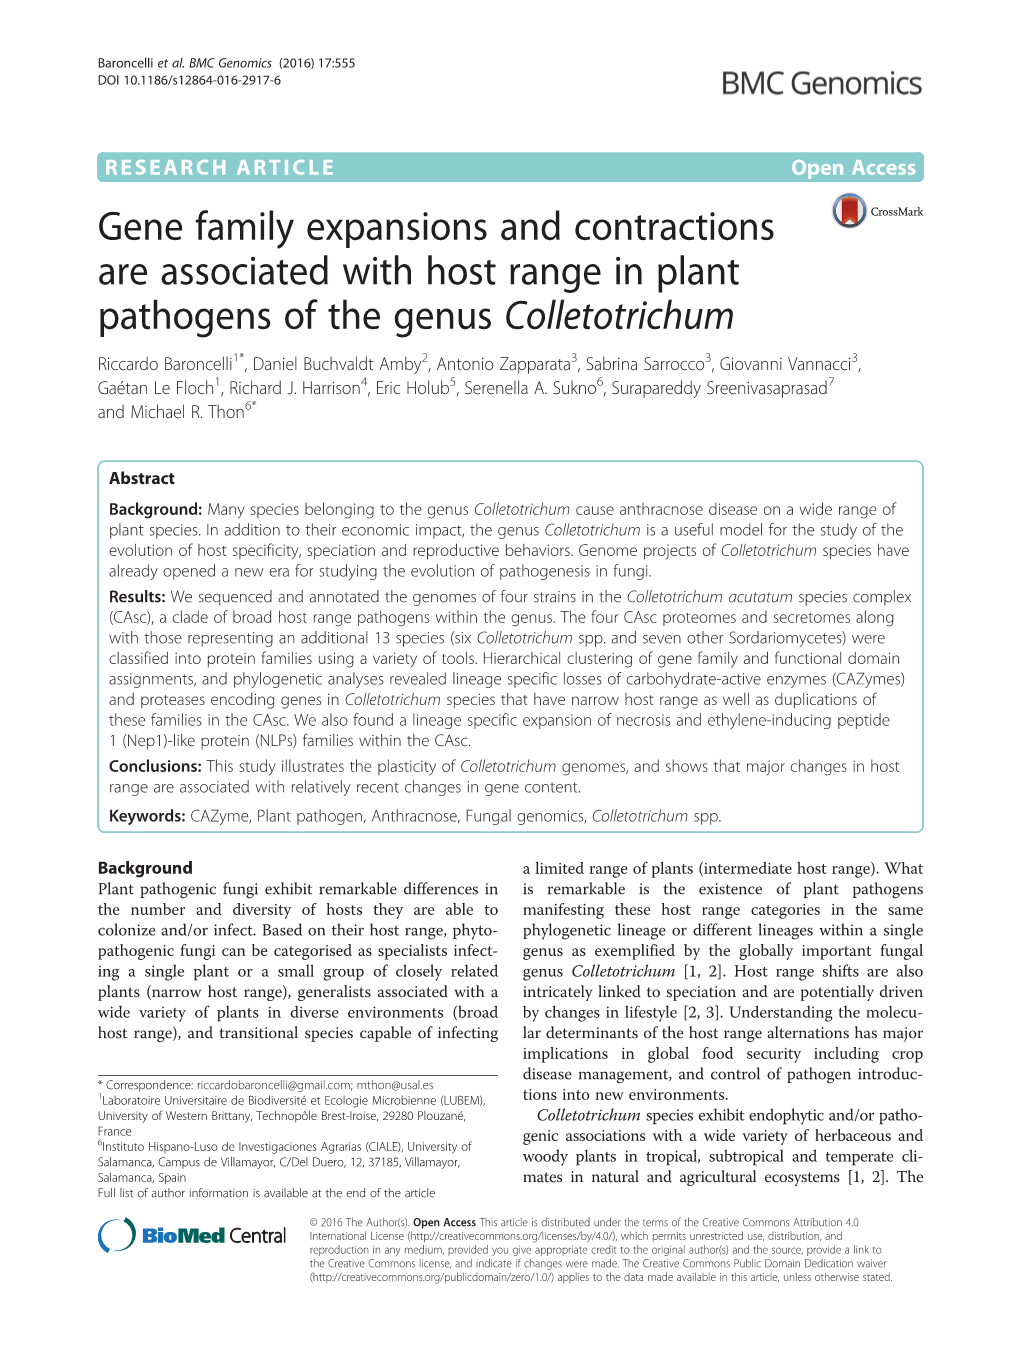 Gene Family Expansions and Contractions Are Associated With